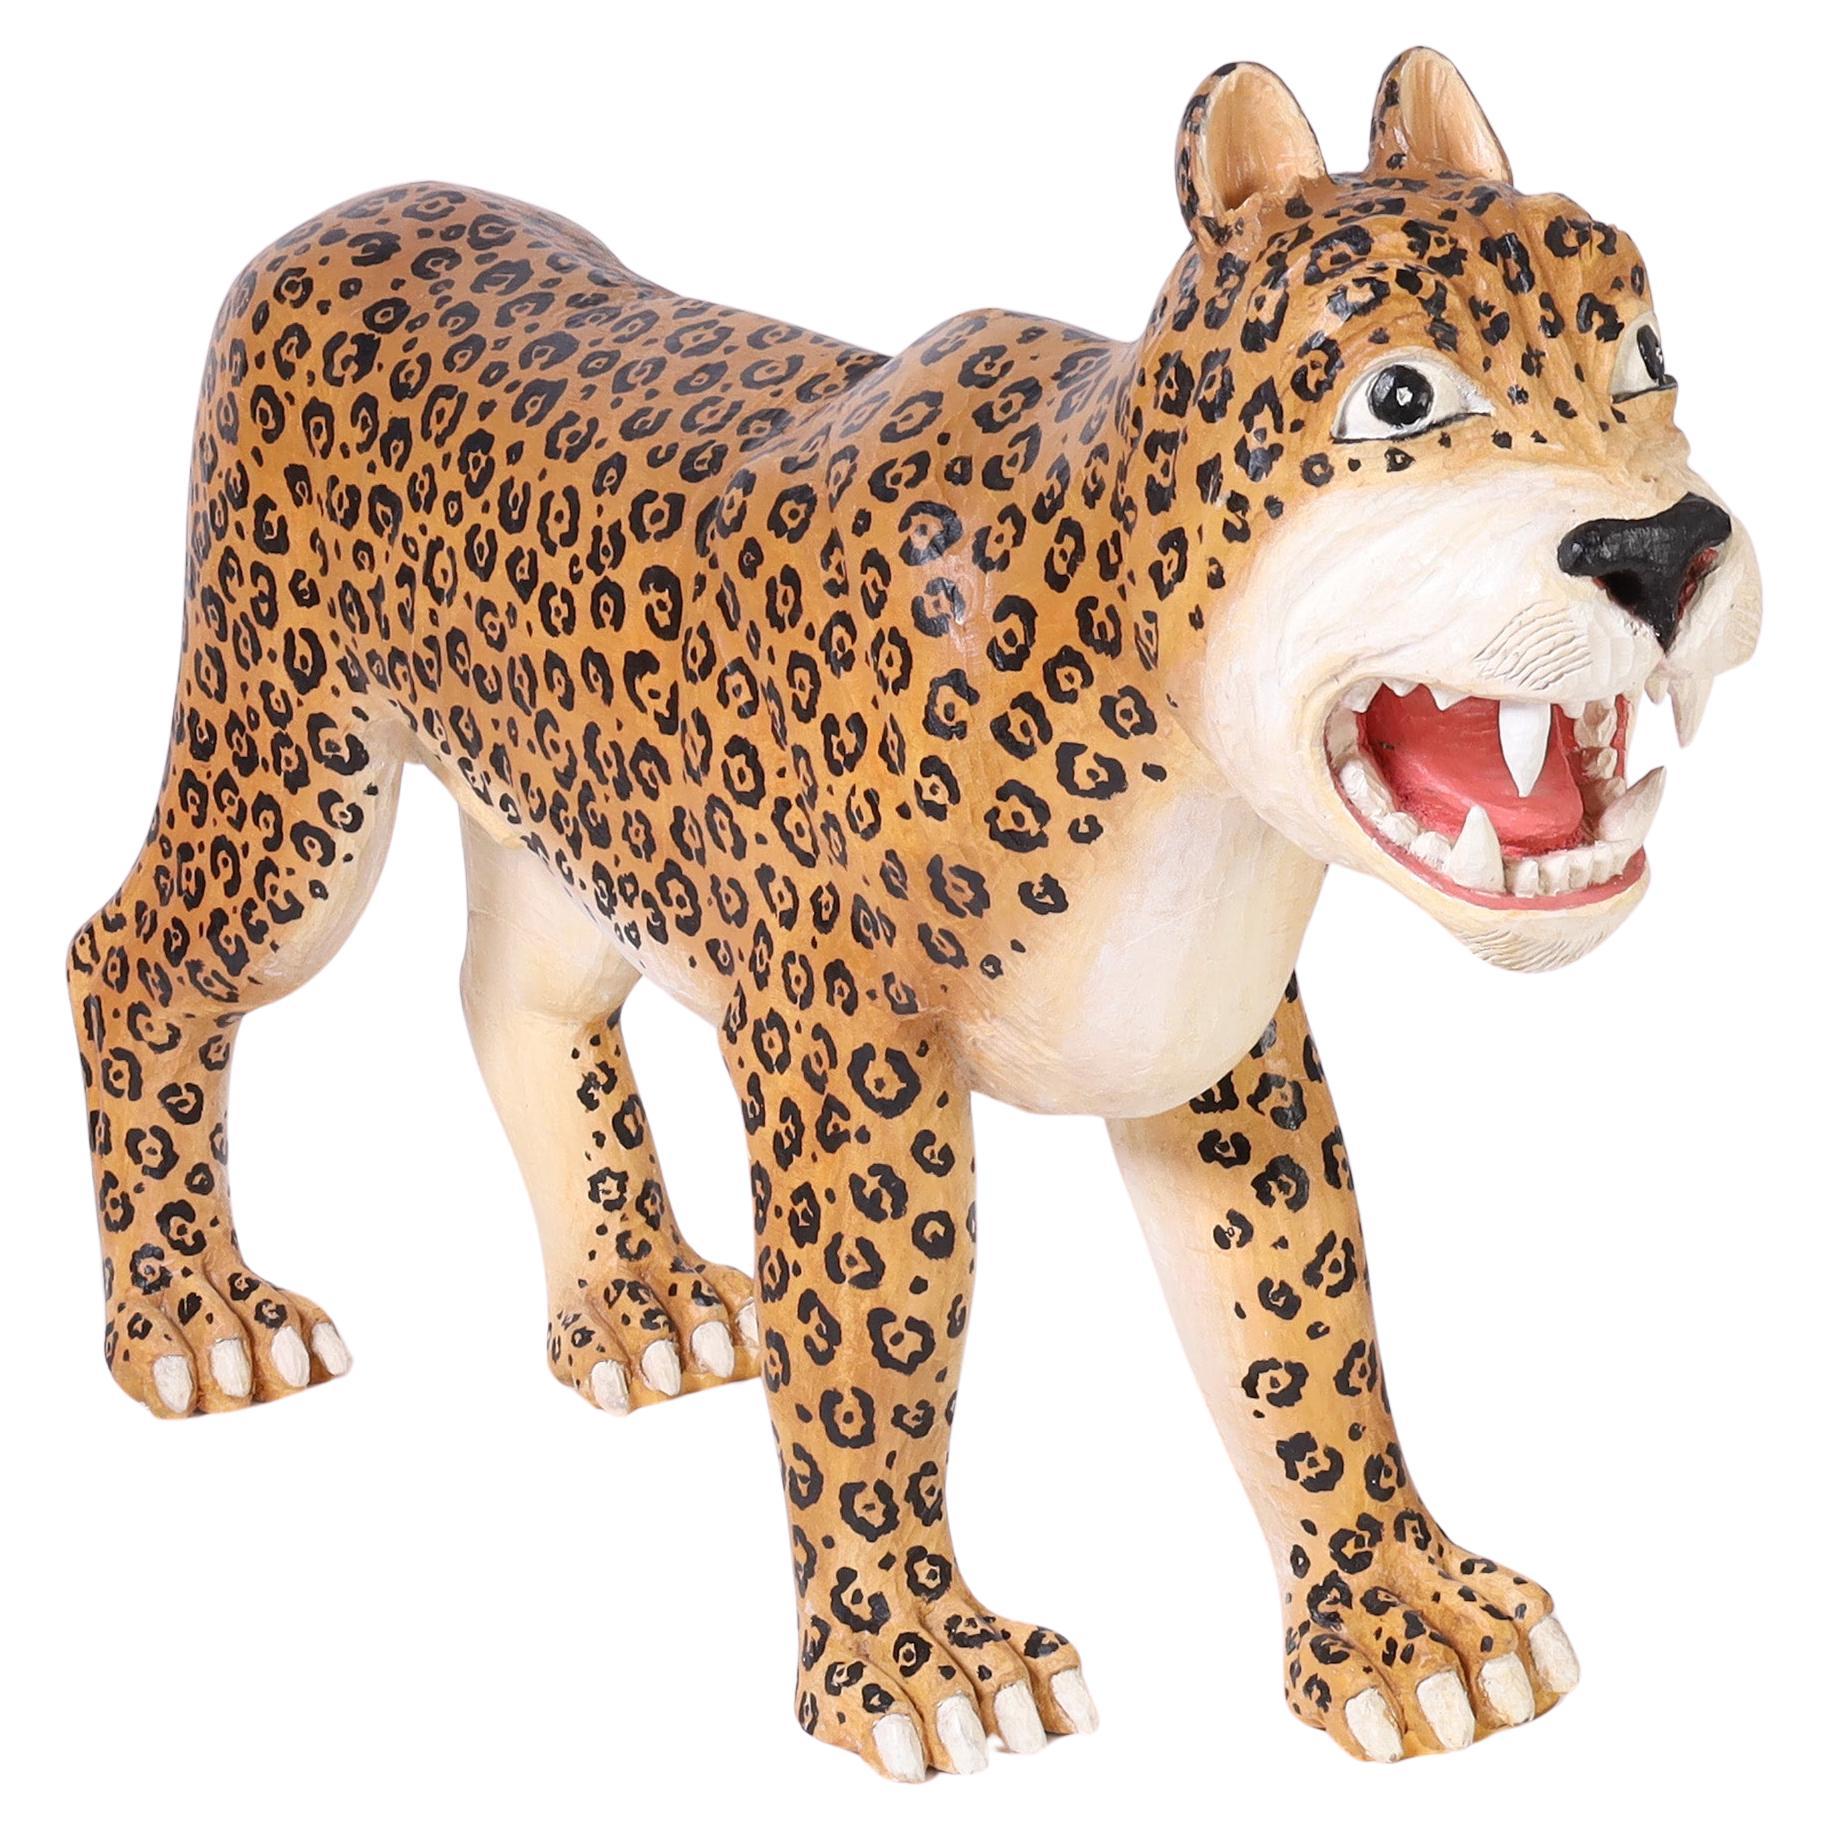 Carved and Painted Wood Jaguar or Big Cat For Sale